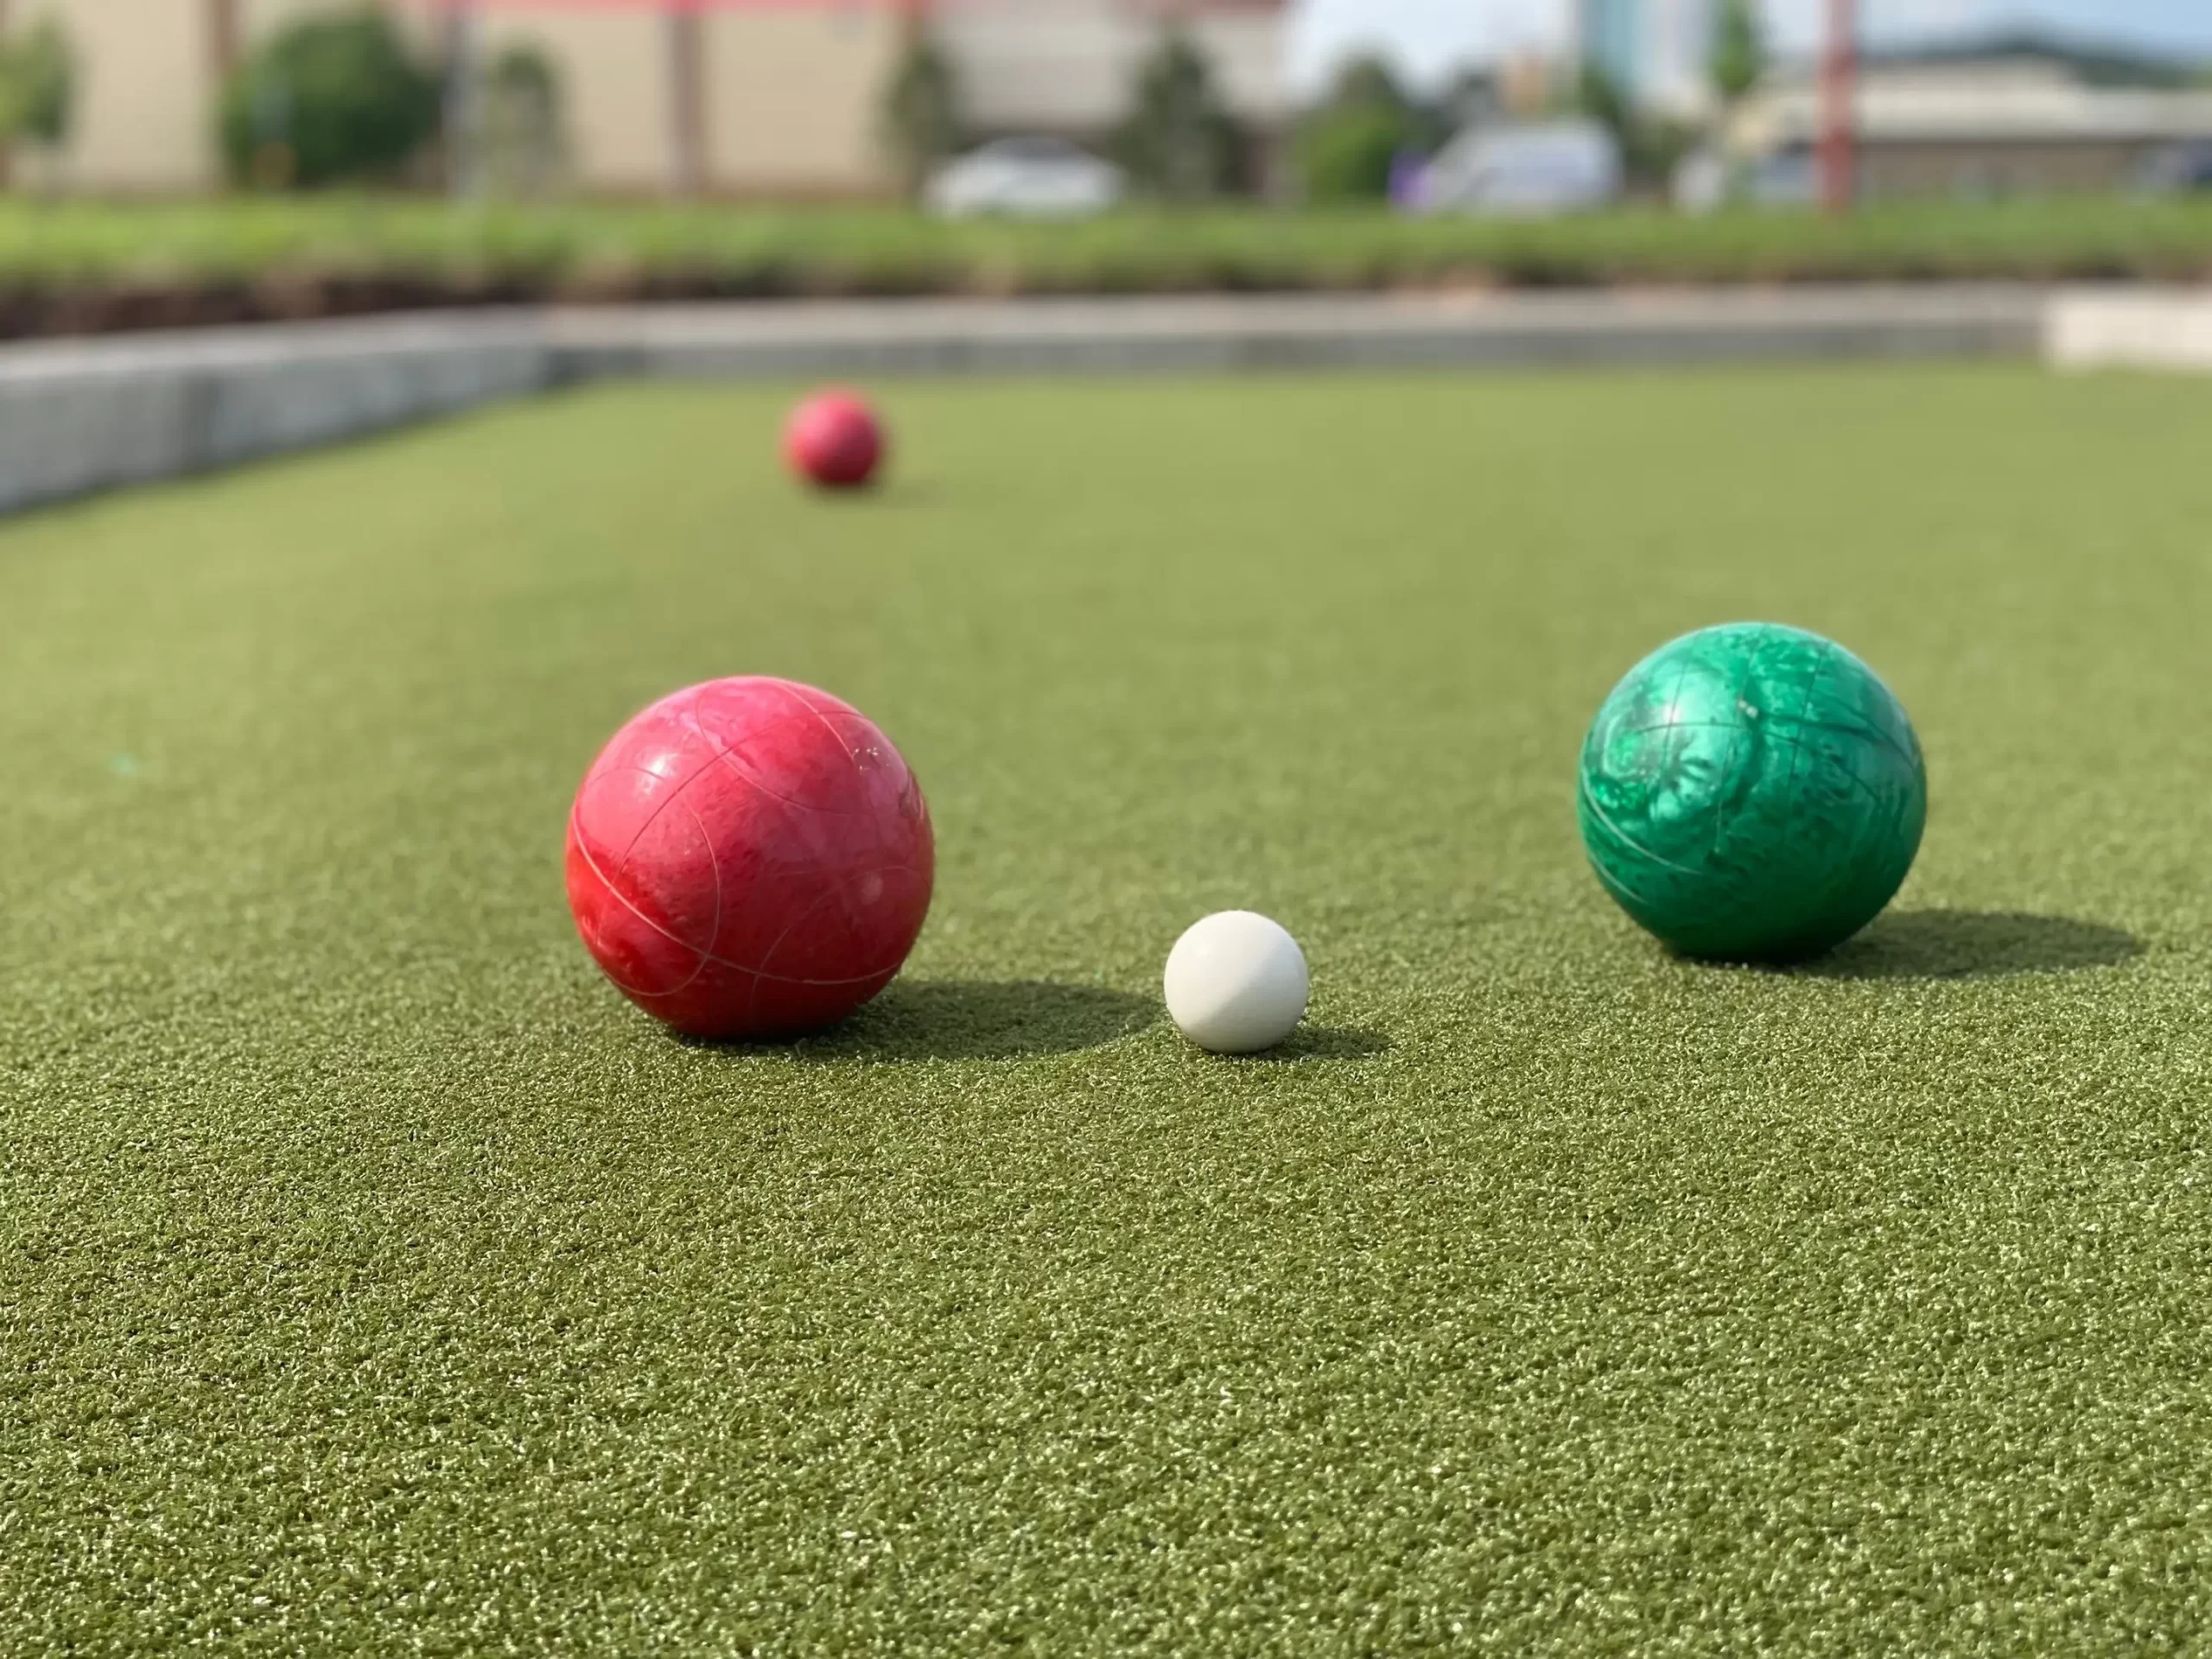 bocce ball on artificial grass lawn